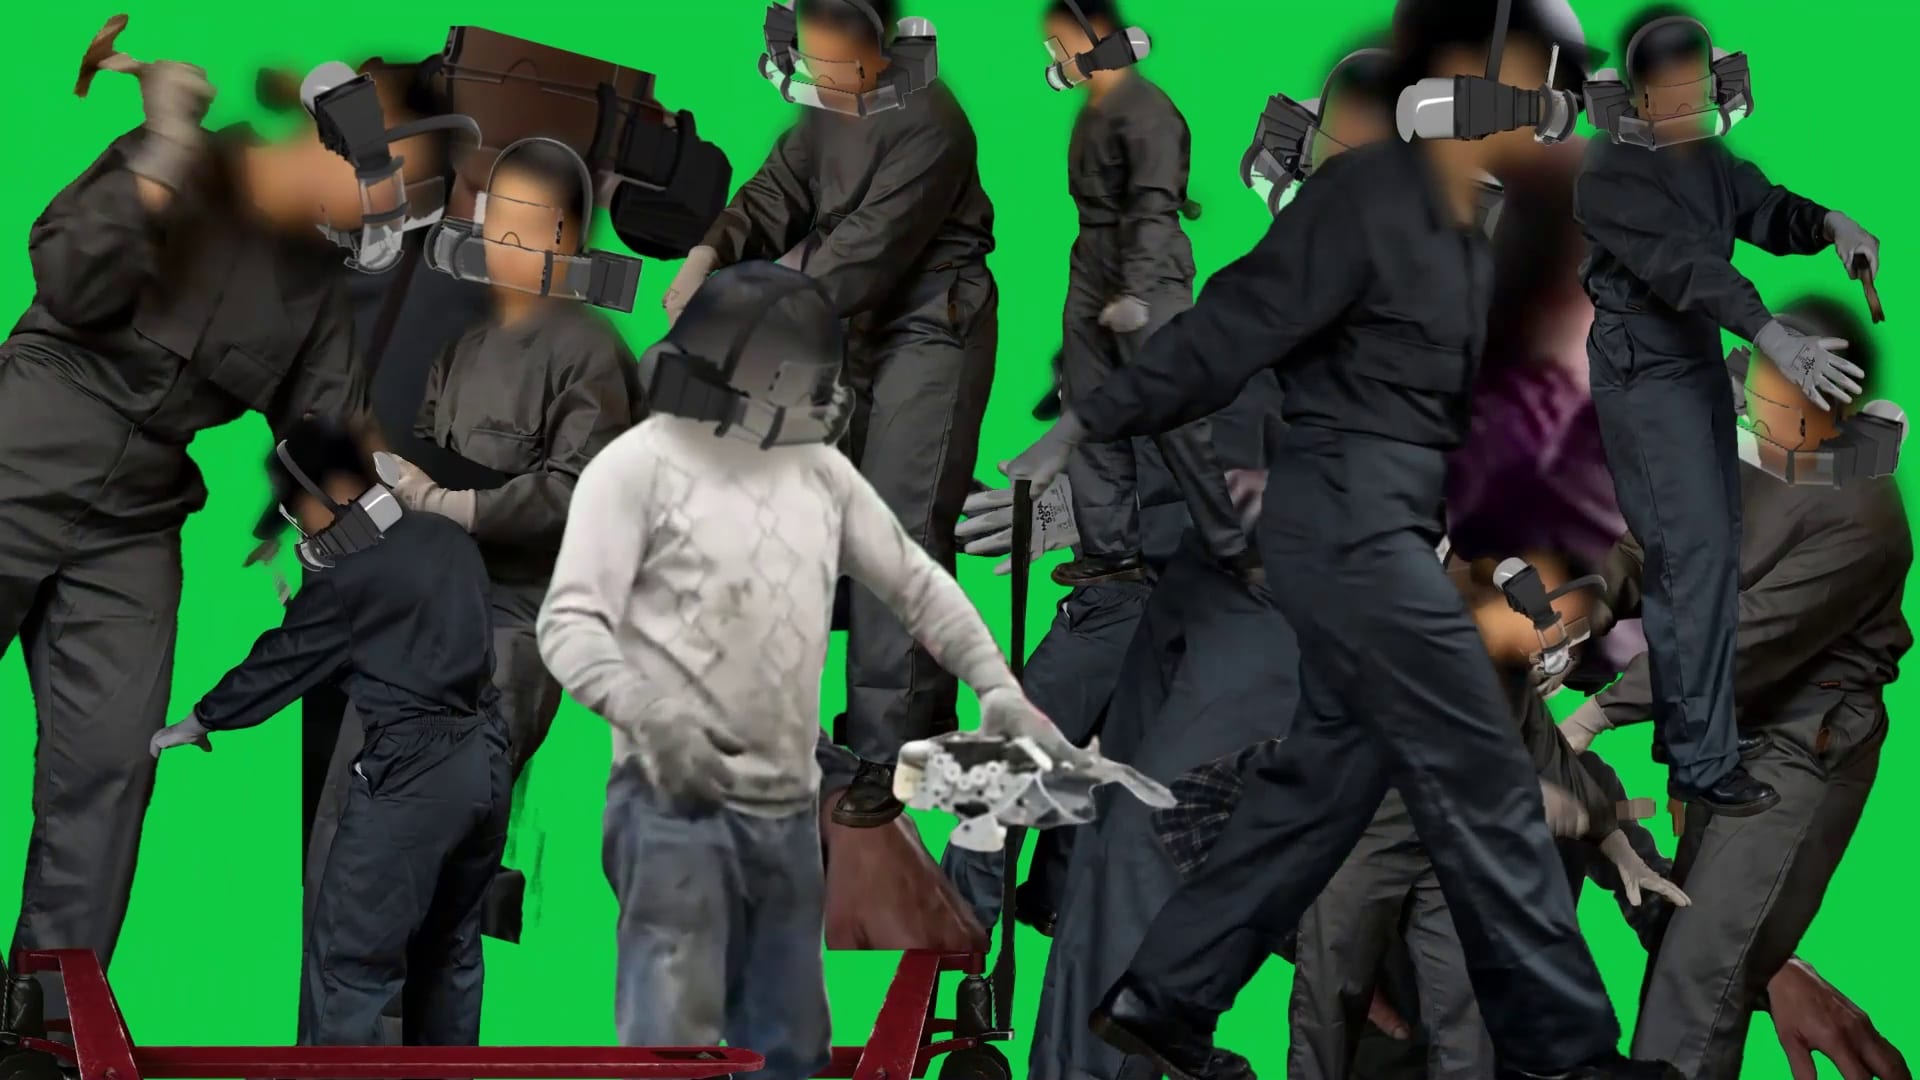 Film still: performers wearing masks perform actions against a green screen background.